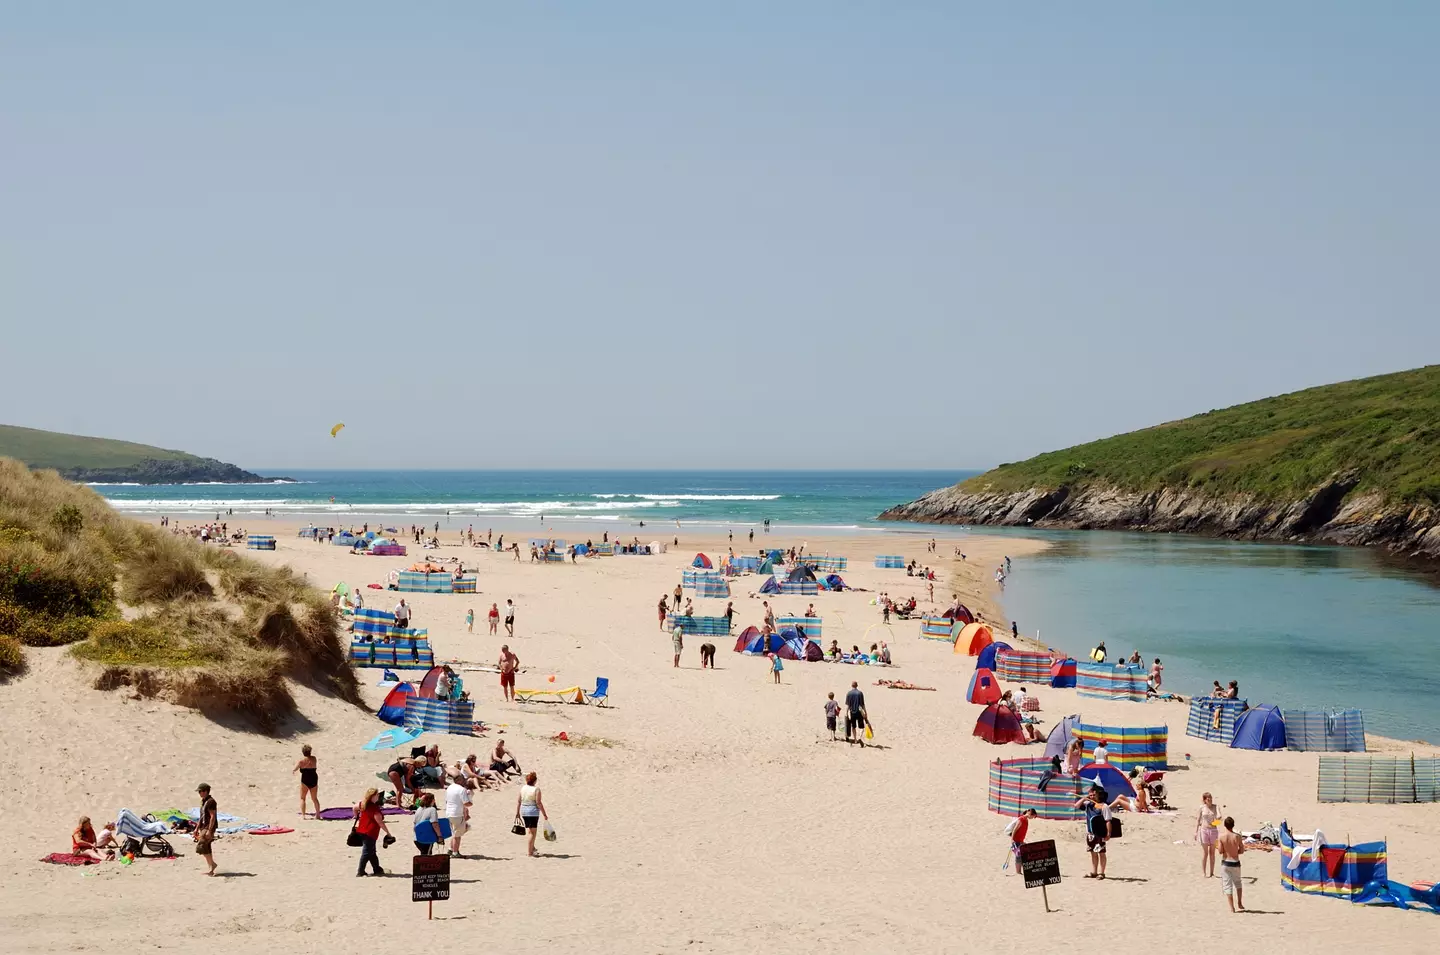 Crantock Beach is hugely popular with tourists.